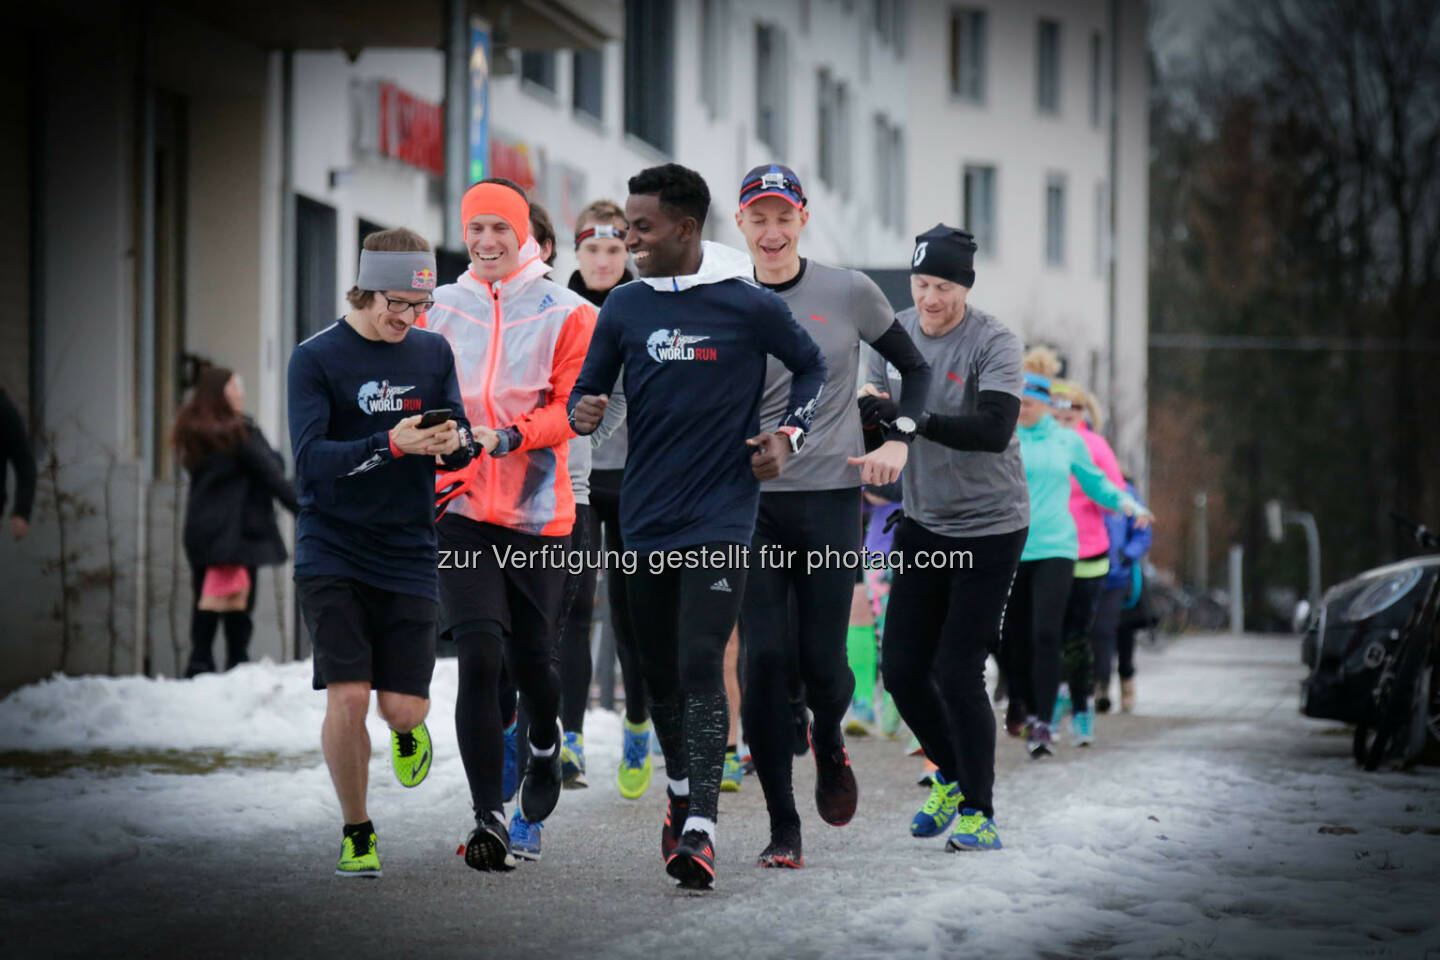 Florian Neuschwander ( left ) and 
Lemawork Ketema ( right ) with participants at the Wings for Life World Run event in Munich 23rd of January 2016 (Bild: Daniel Grund)